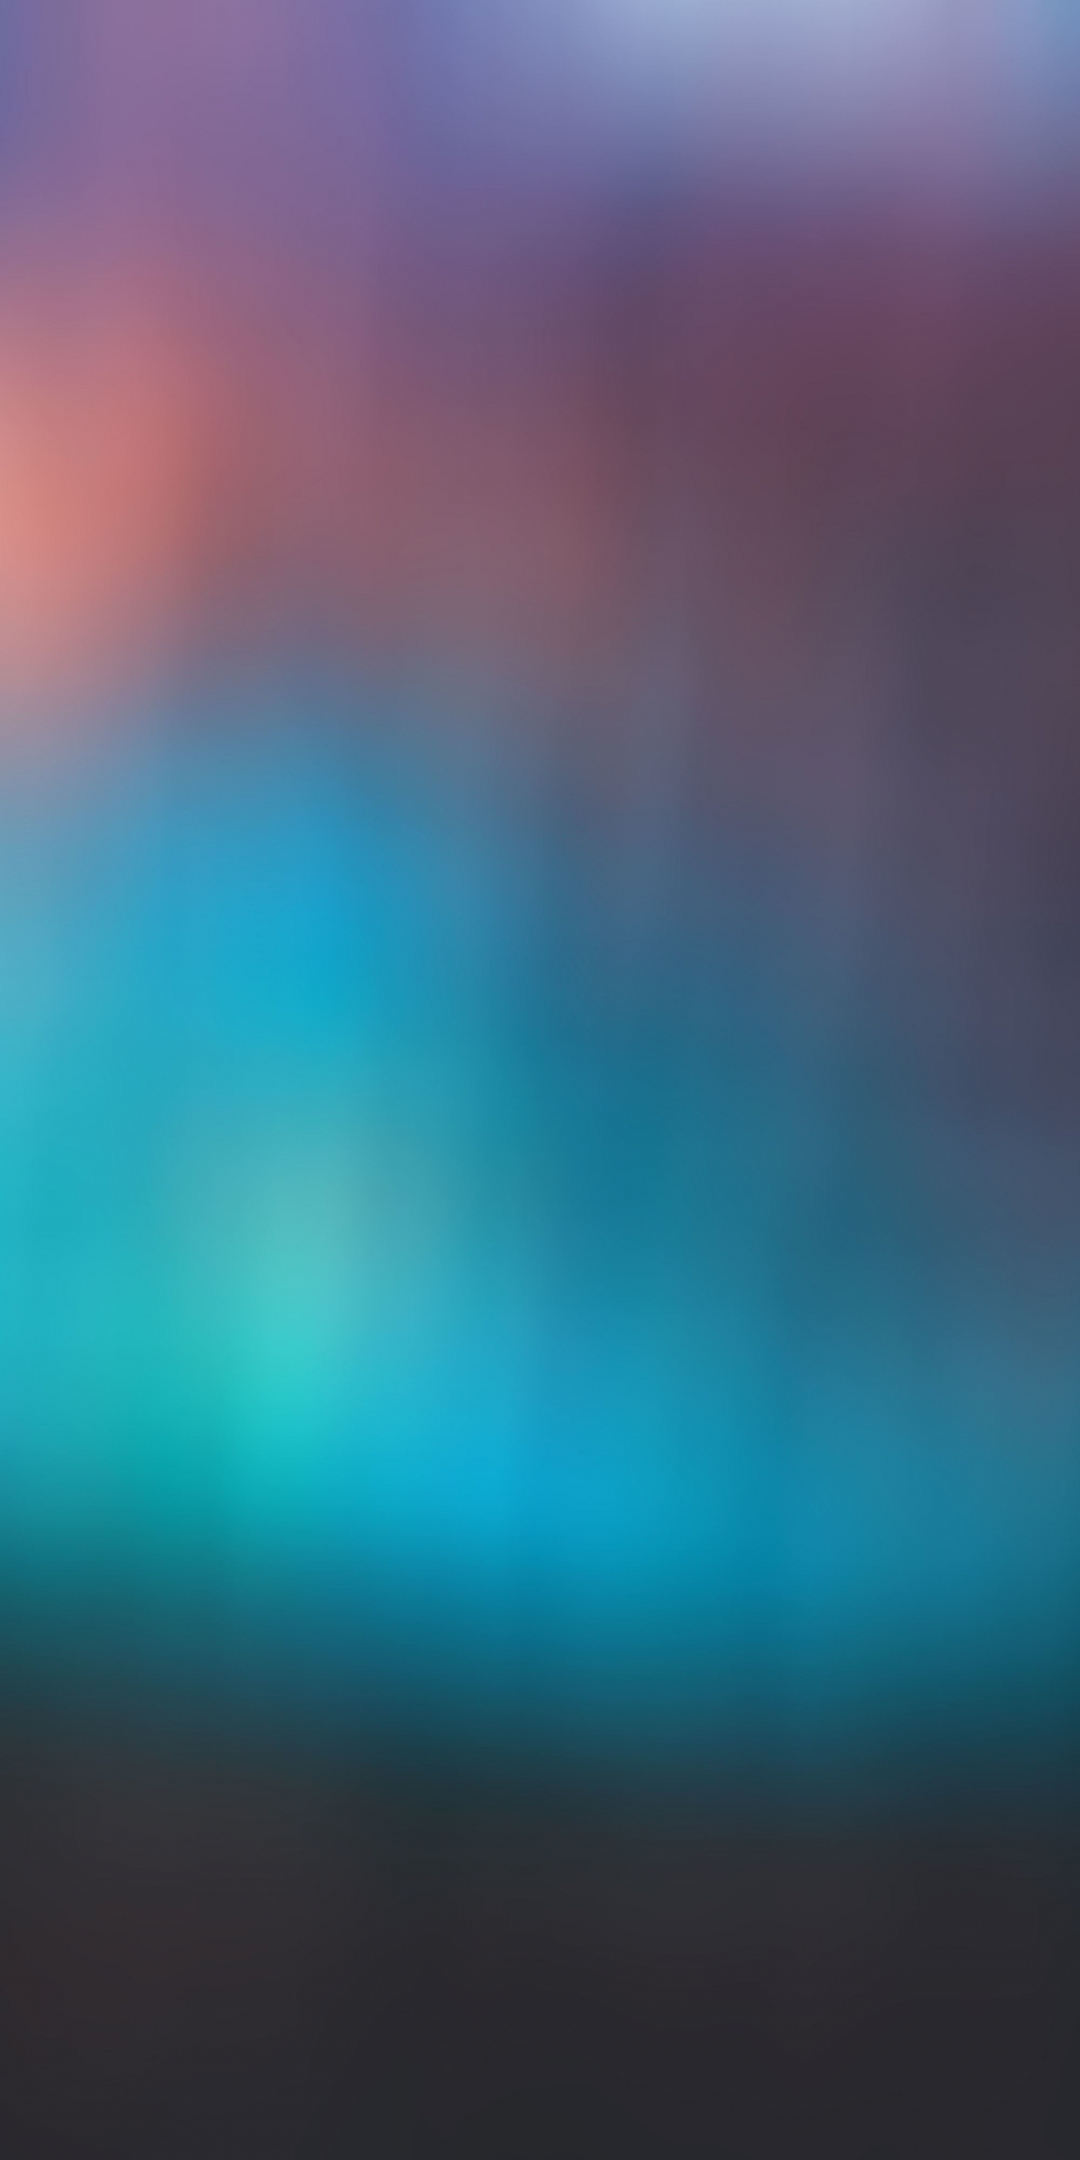 Gradient, blur, colorful, abstract, 1080x2160 wallpaper